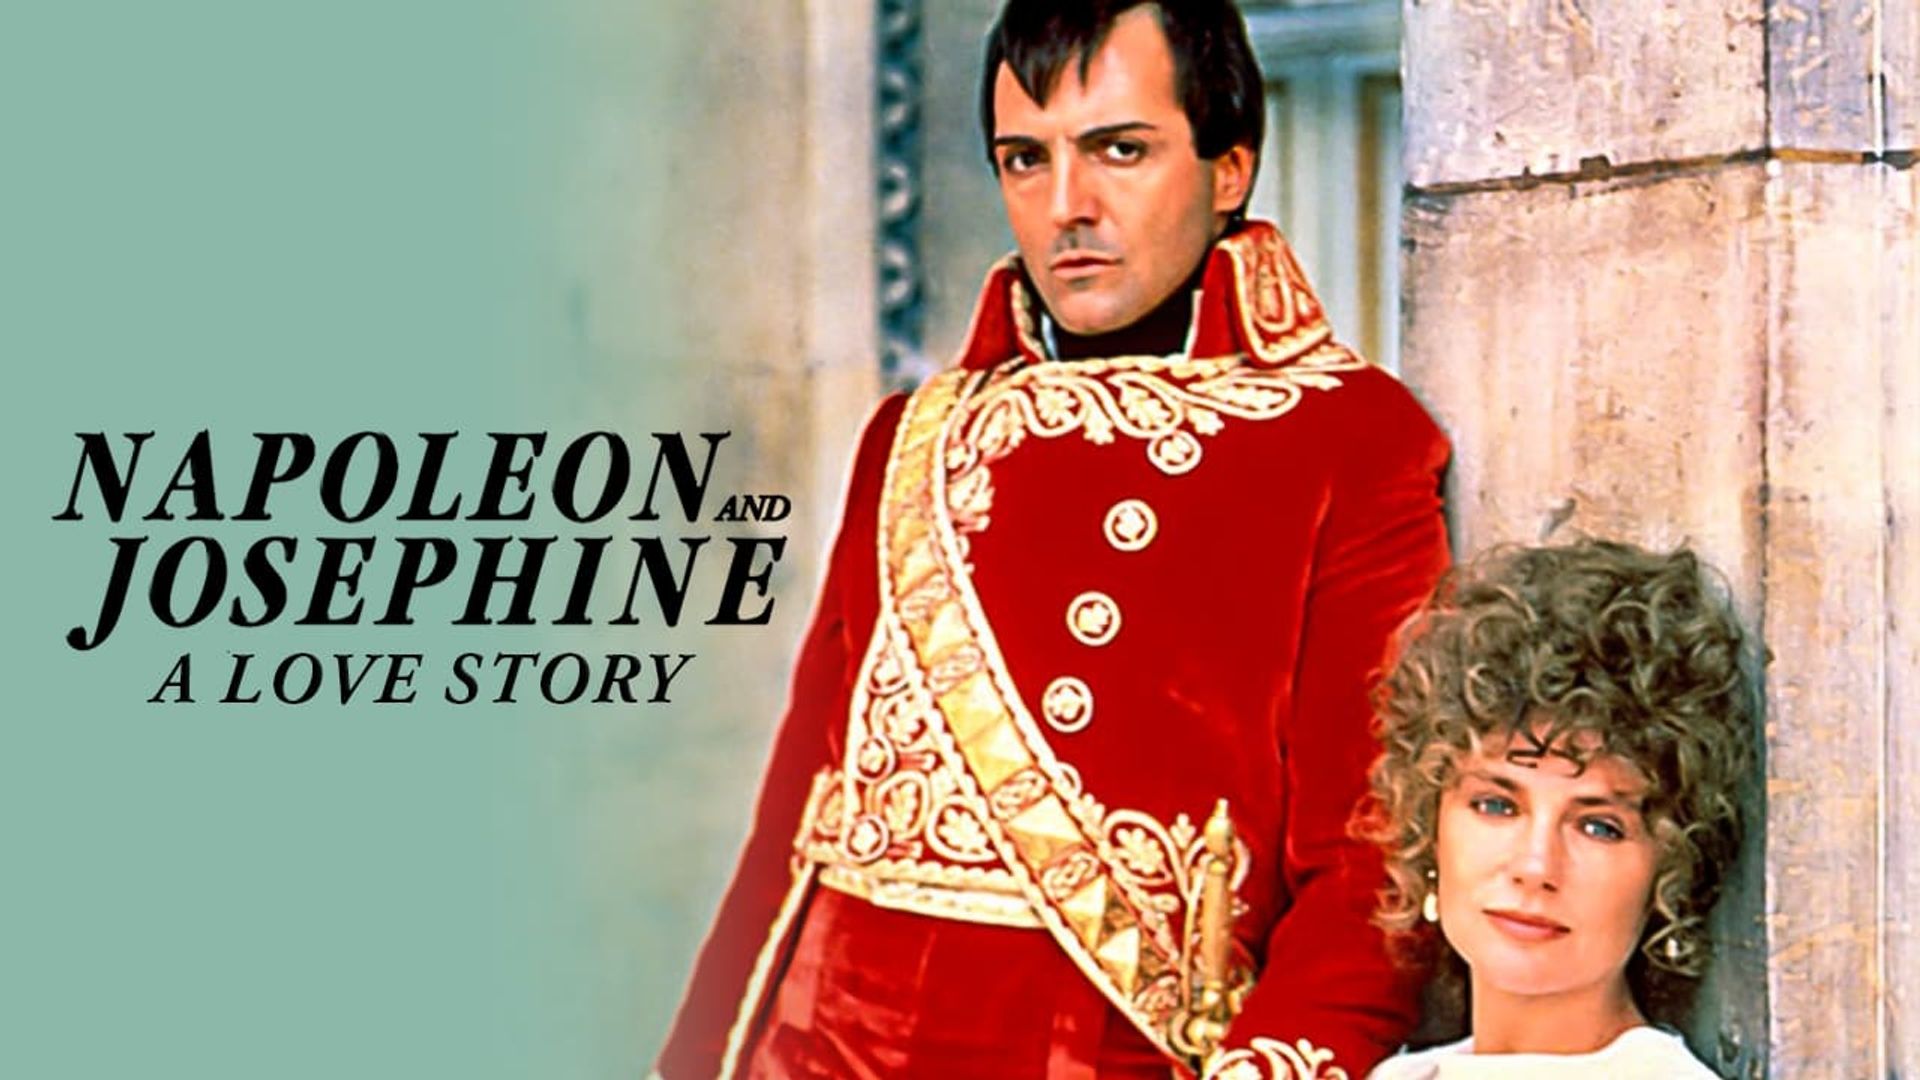 Napoleon and Josephine: A Love Story background